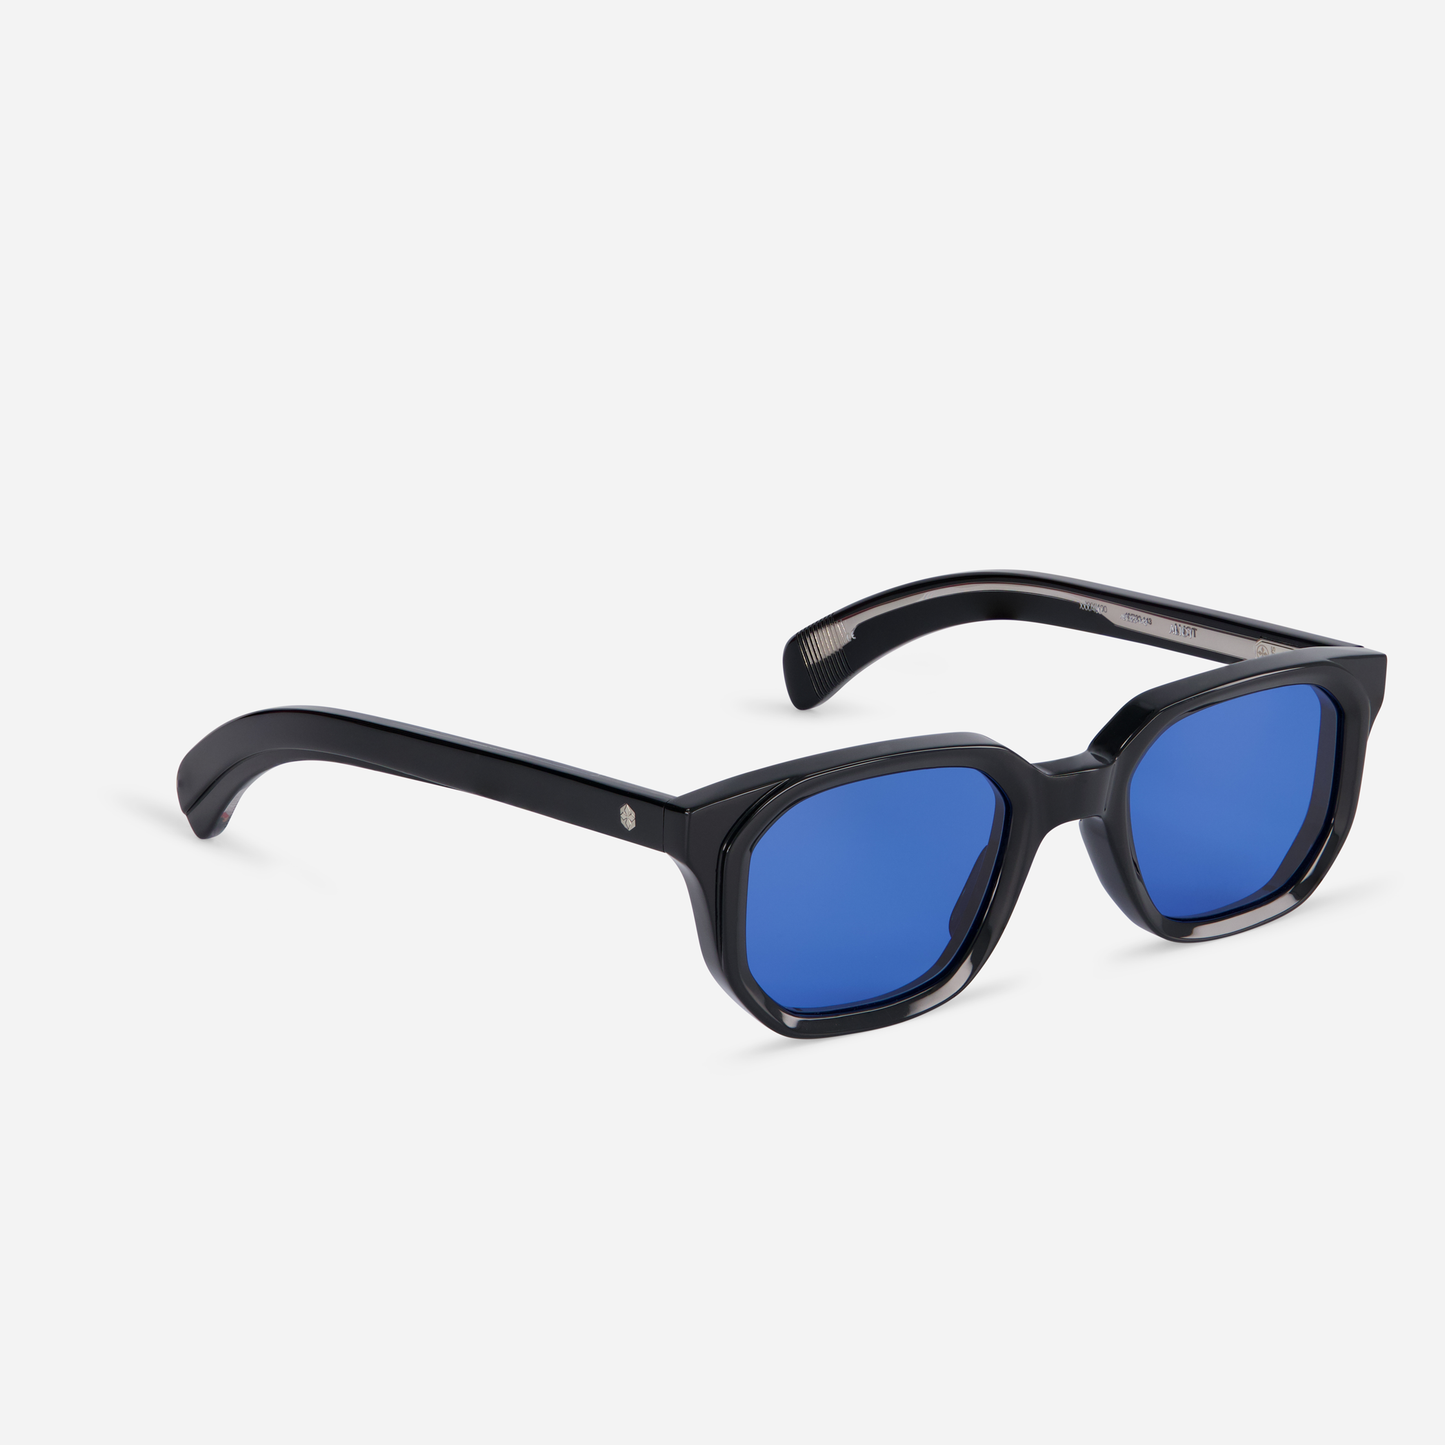 Sato Aliot Glasses: The perfect blend of black style and the boldness of blue lenses for a unique look.